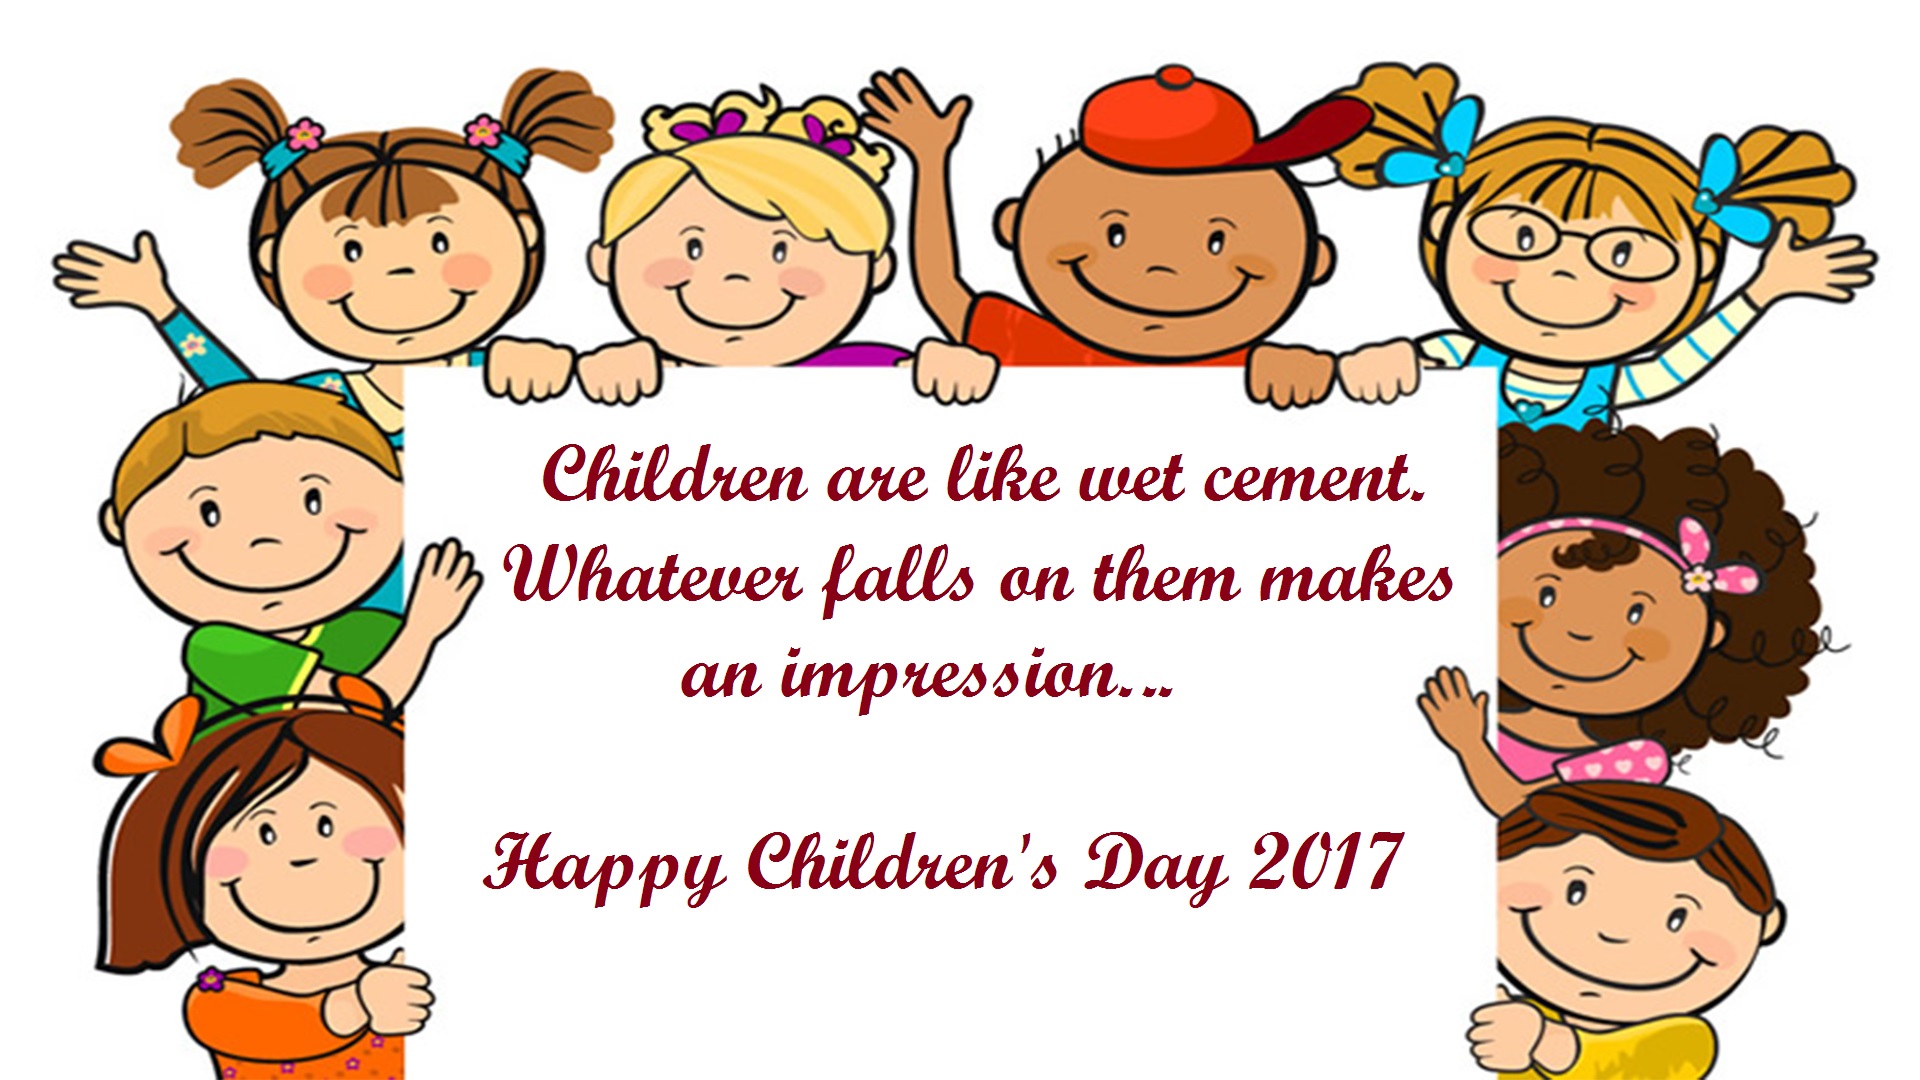 childrens day quotes image 2017